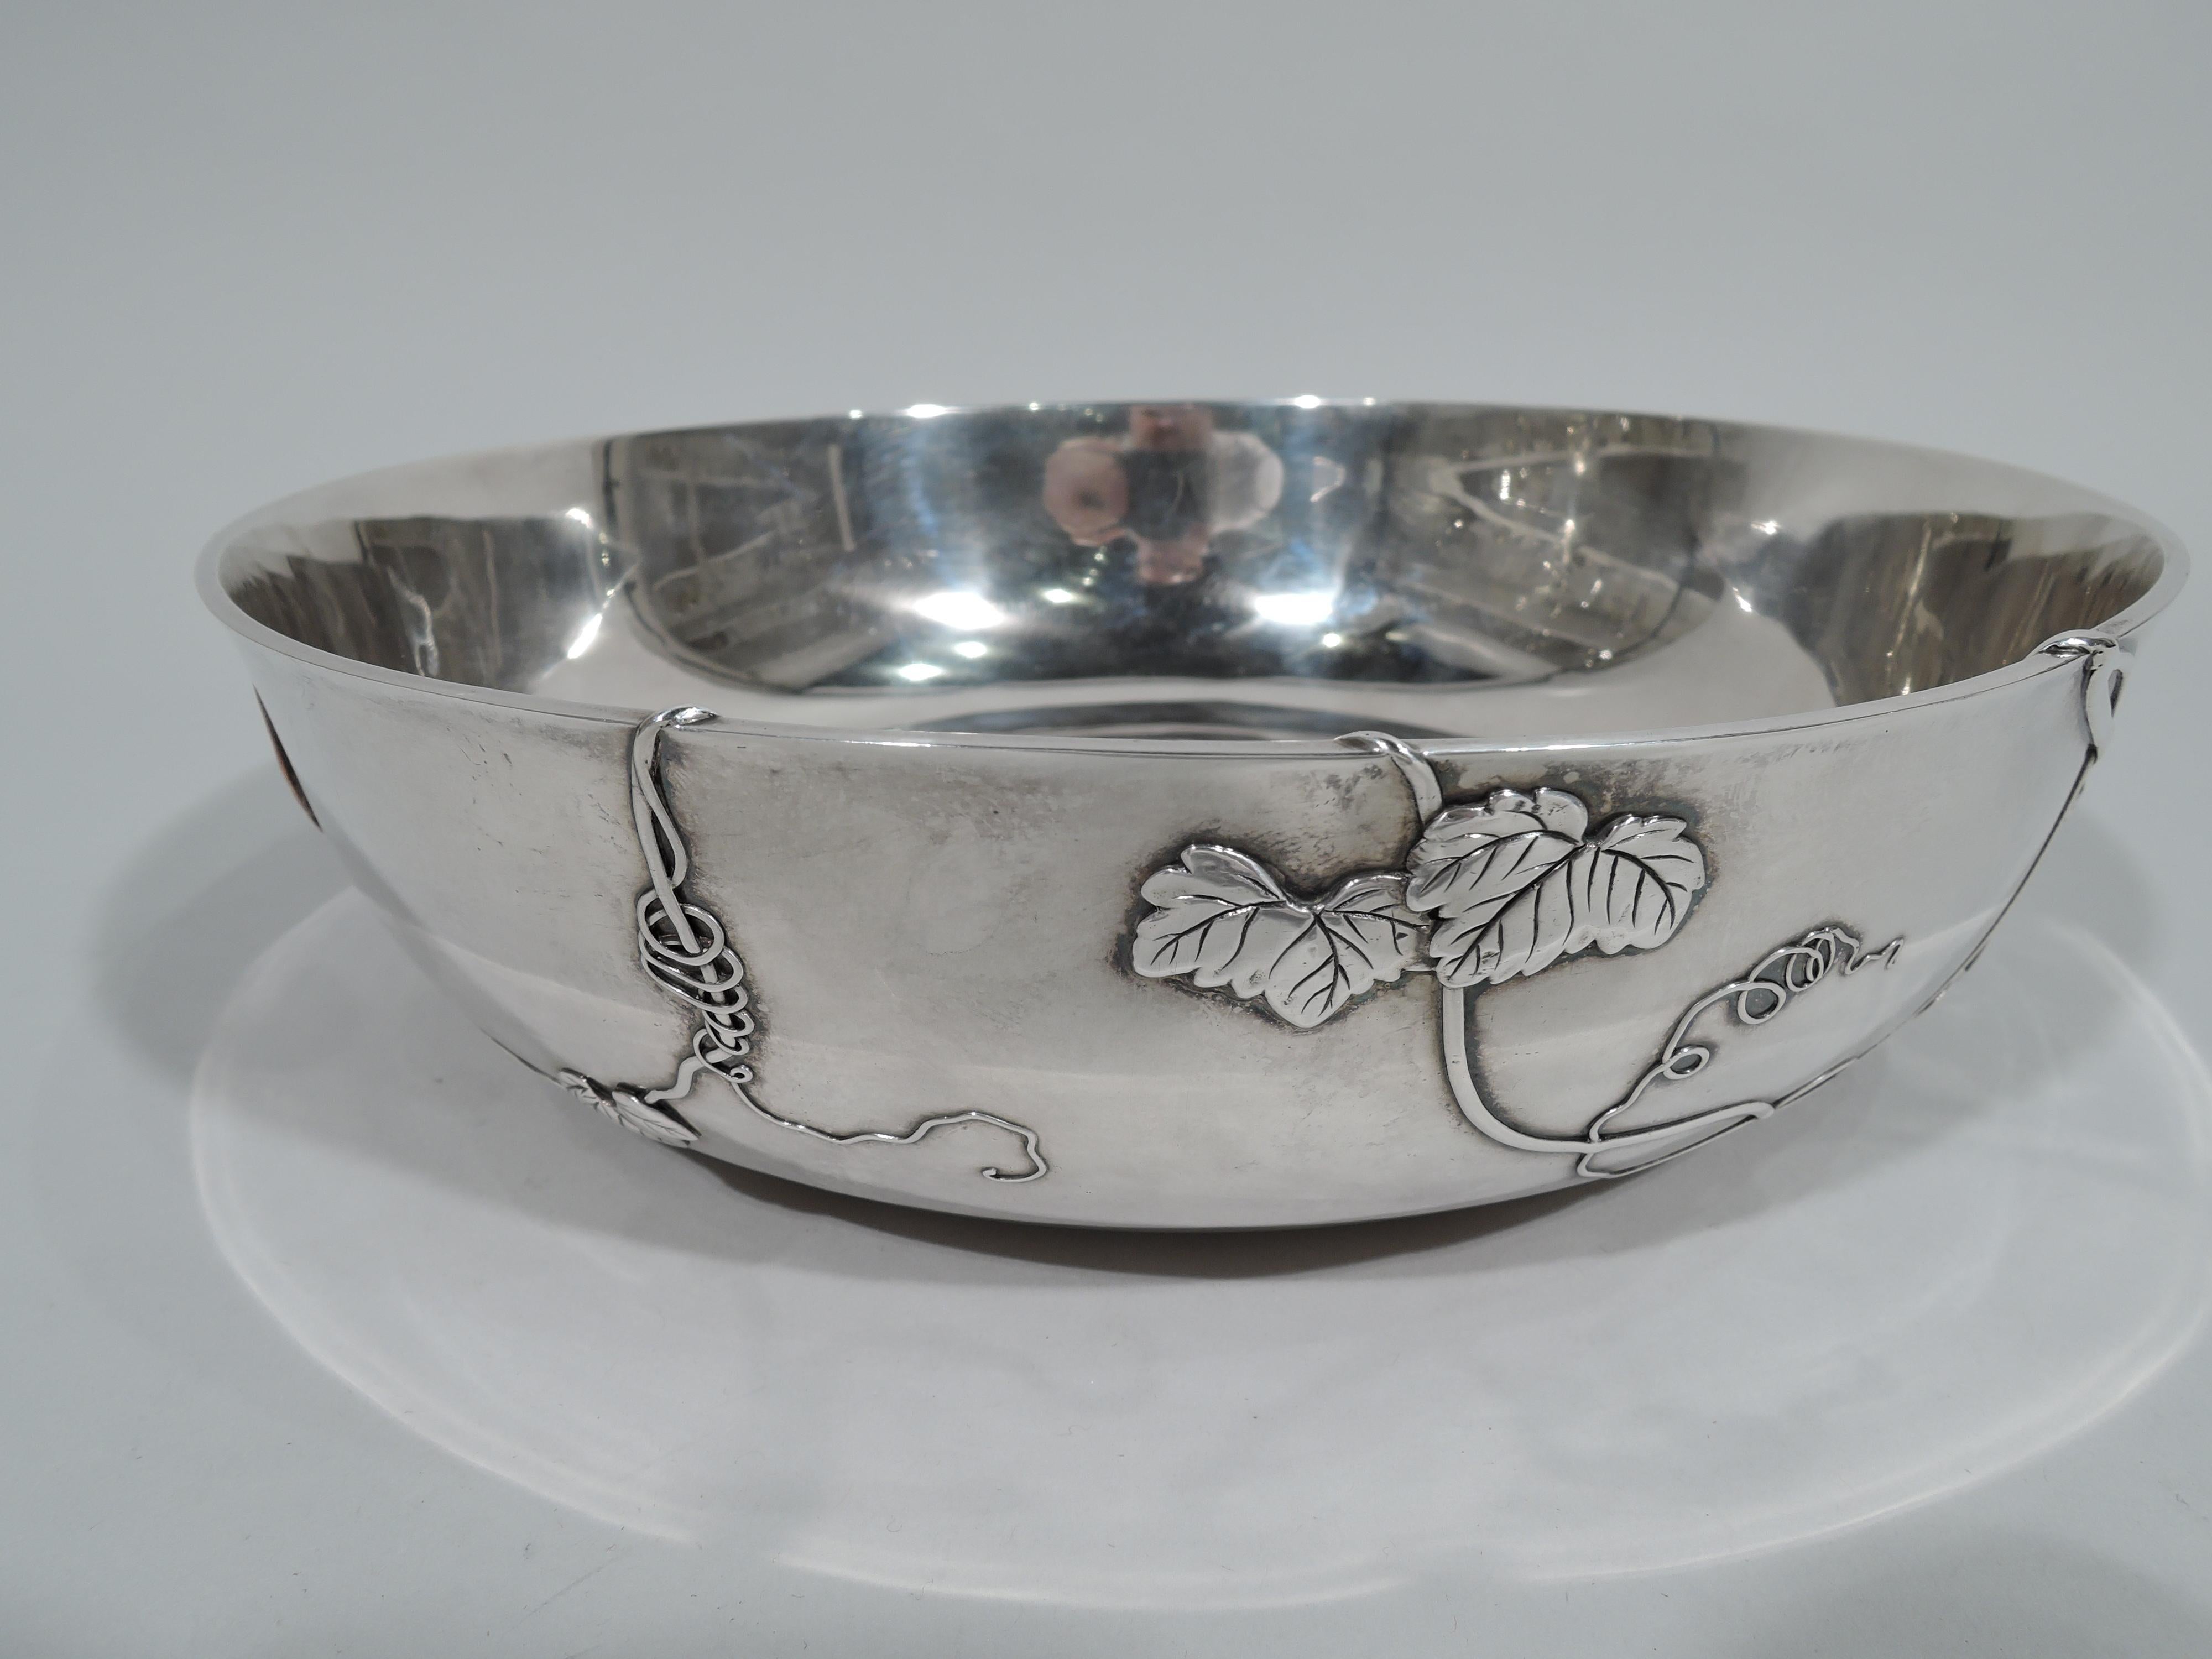 Japonesque mixed metal and sterling silver bowl. Made by Tiffany & Co. in New York. Round with curved sides. Applied to exterior are sinuous and curlicue leafy tendrils with butterflies, dragonfly, and grasshopper. Some spillover on interior as well